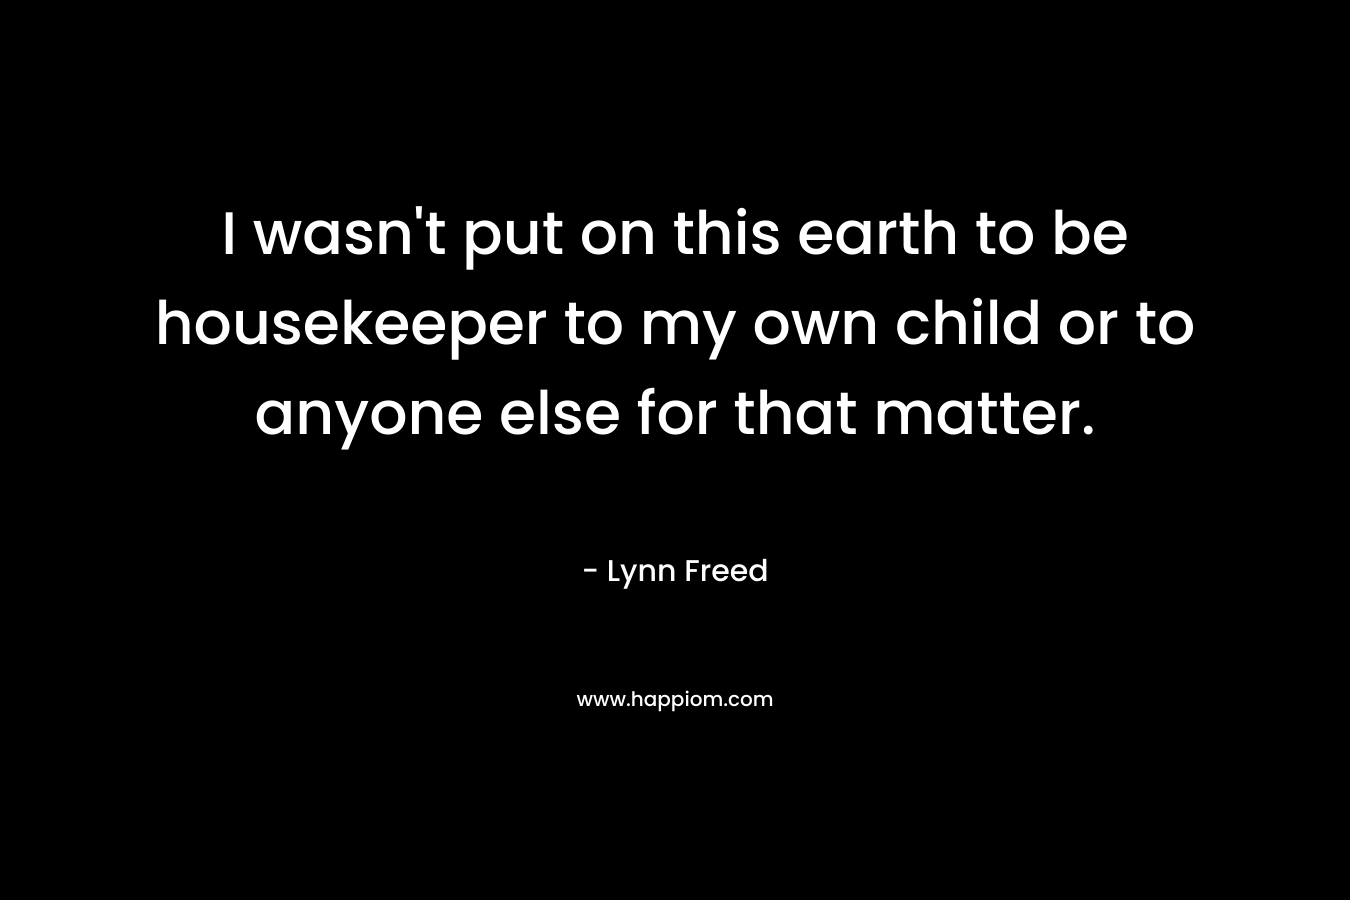 I wasn't put on this earth to be housekeeper to my own child or to anyone else for that matter.